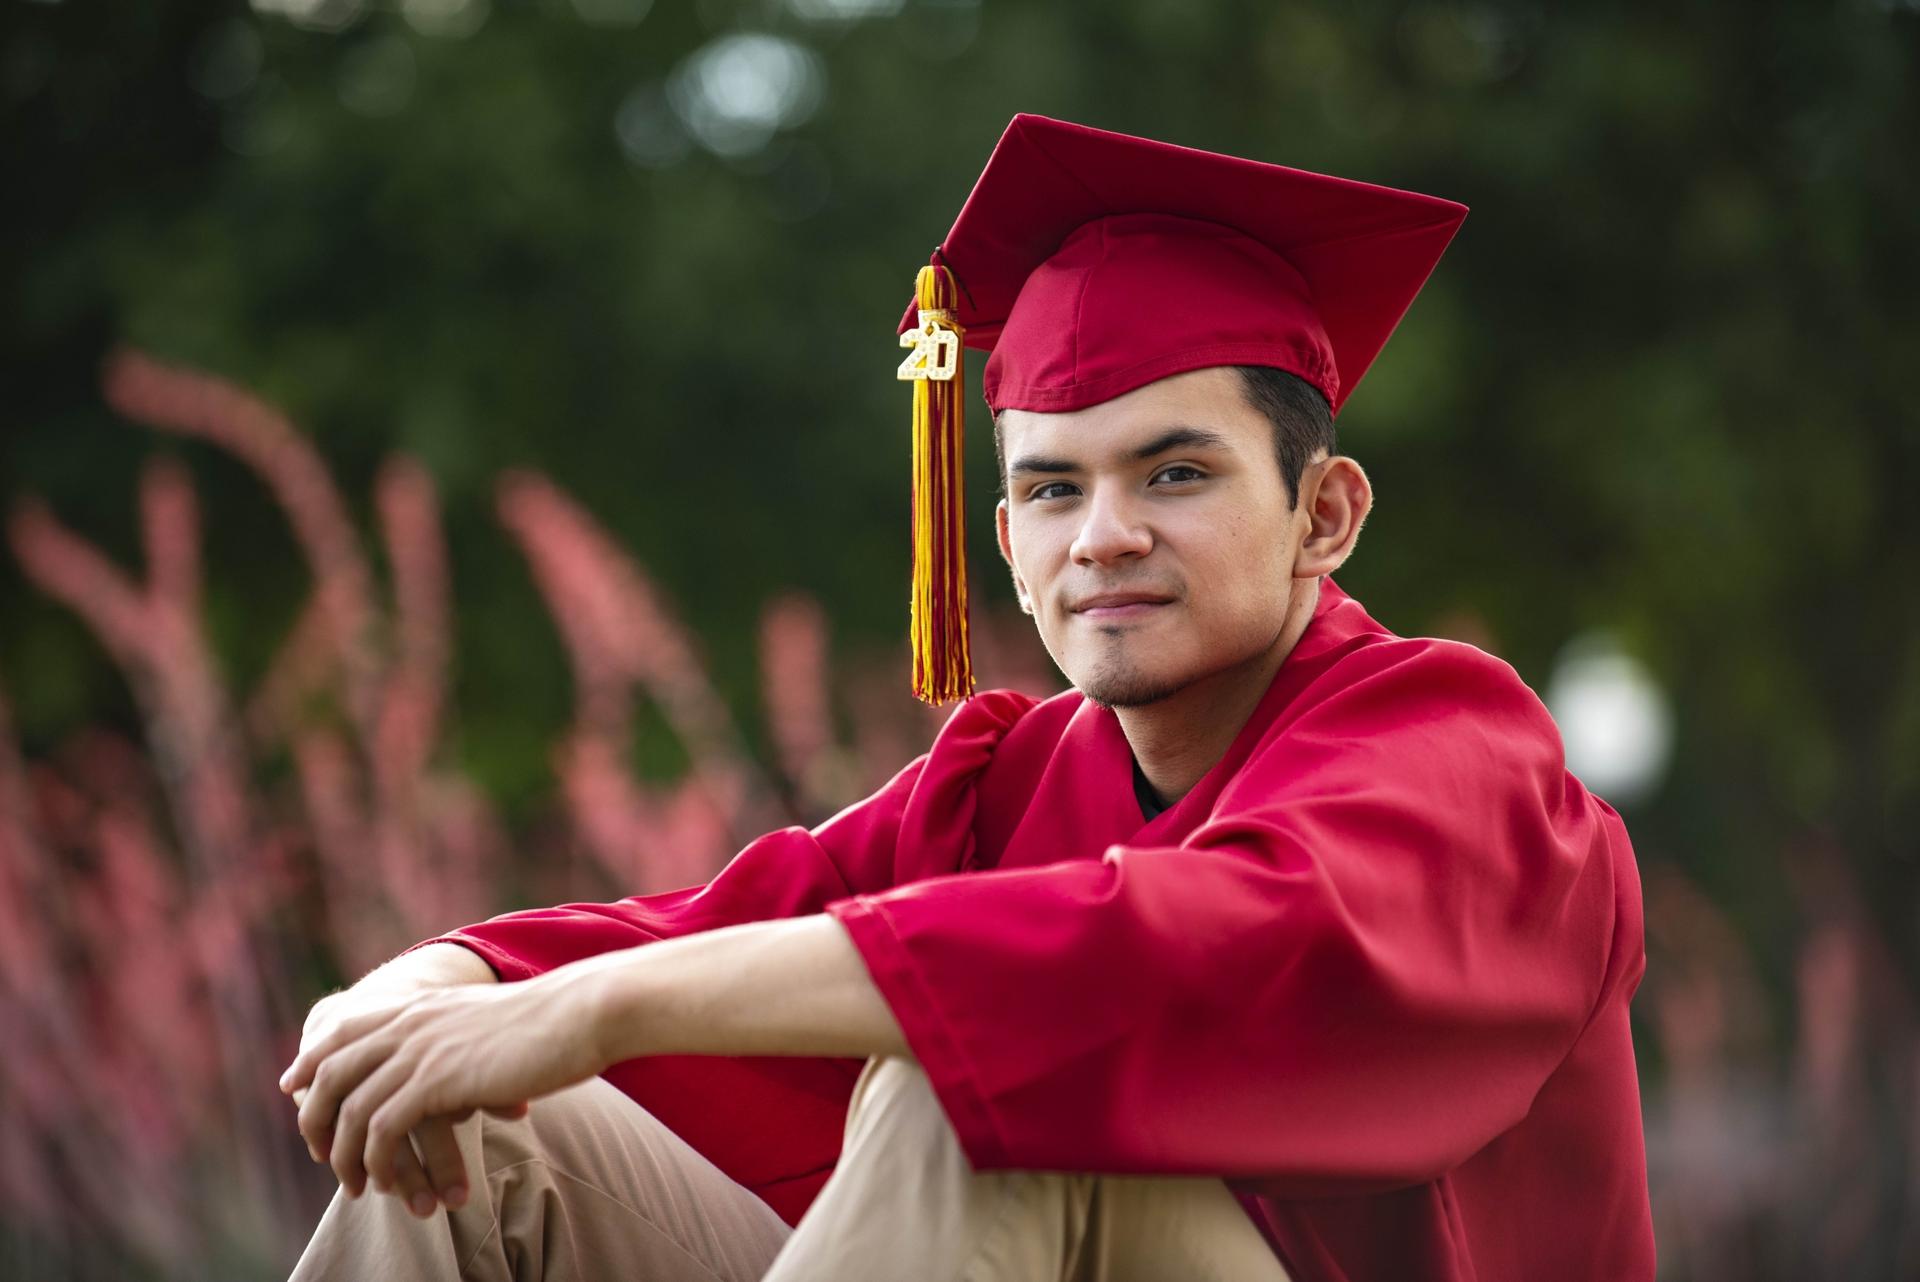 A young man wears a red graduation gown, cap and tassel.